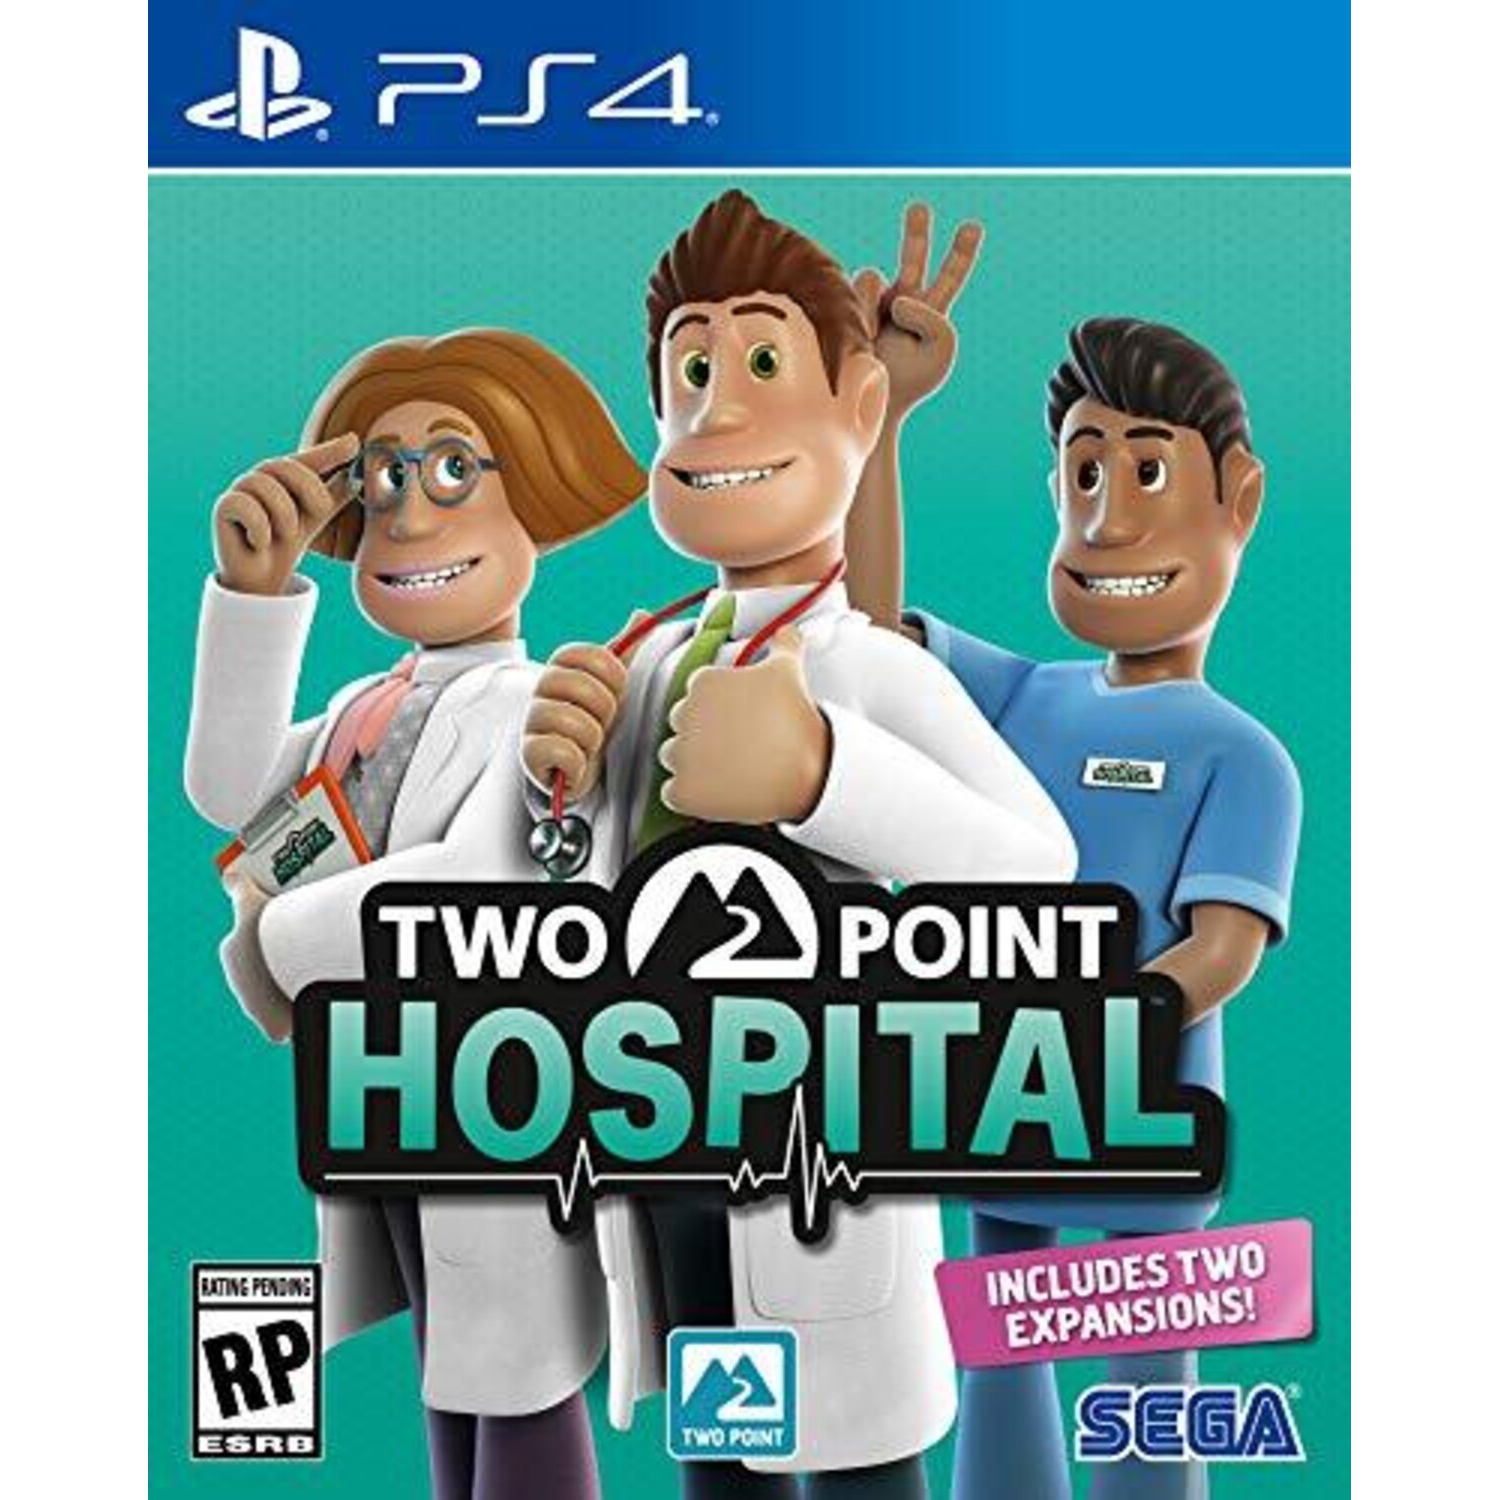 Two Point Hospital for PlayStation 4 [VIDEOGAMES]